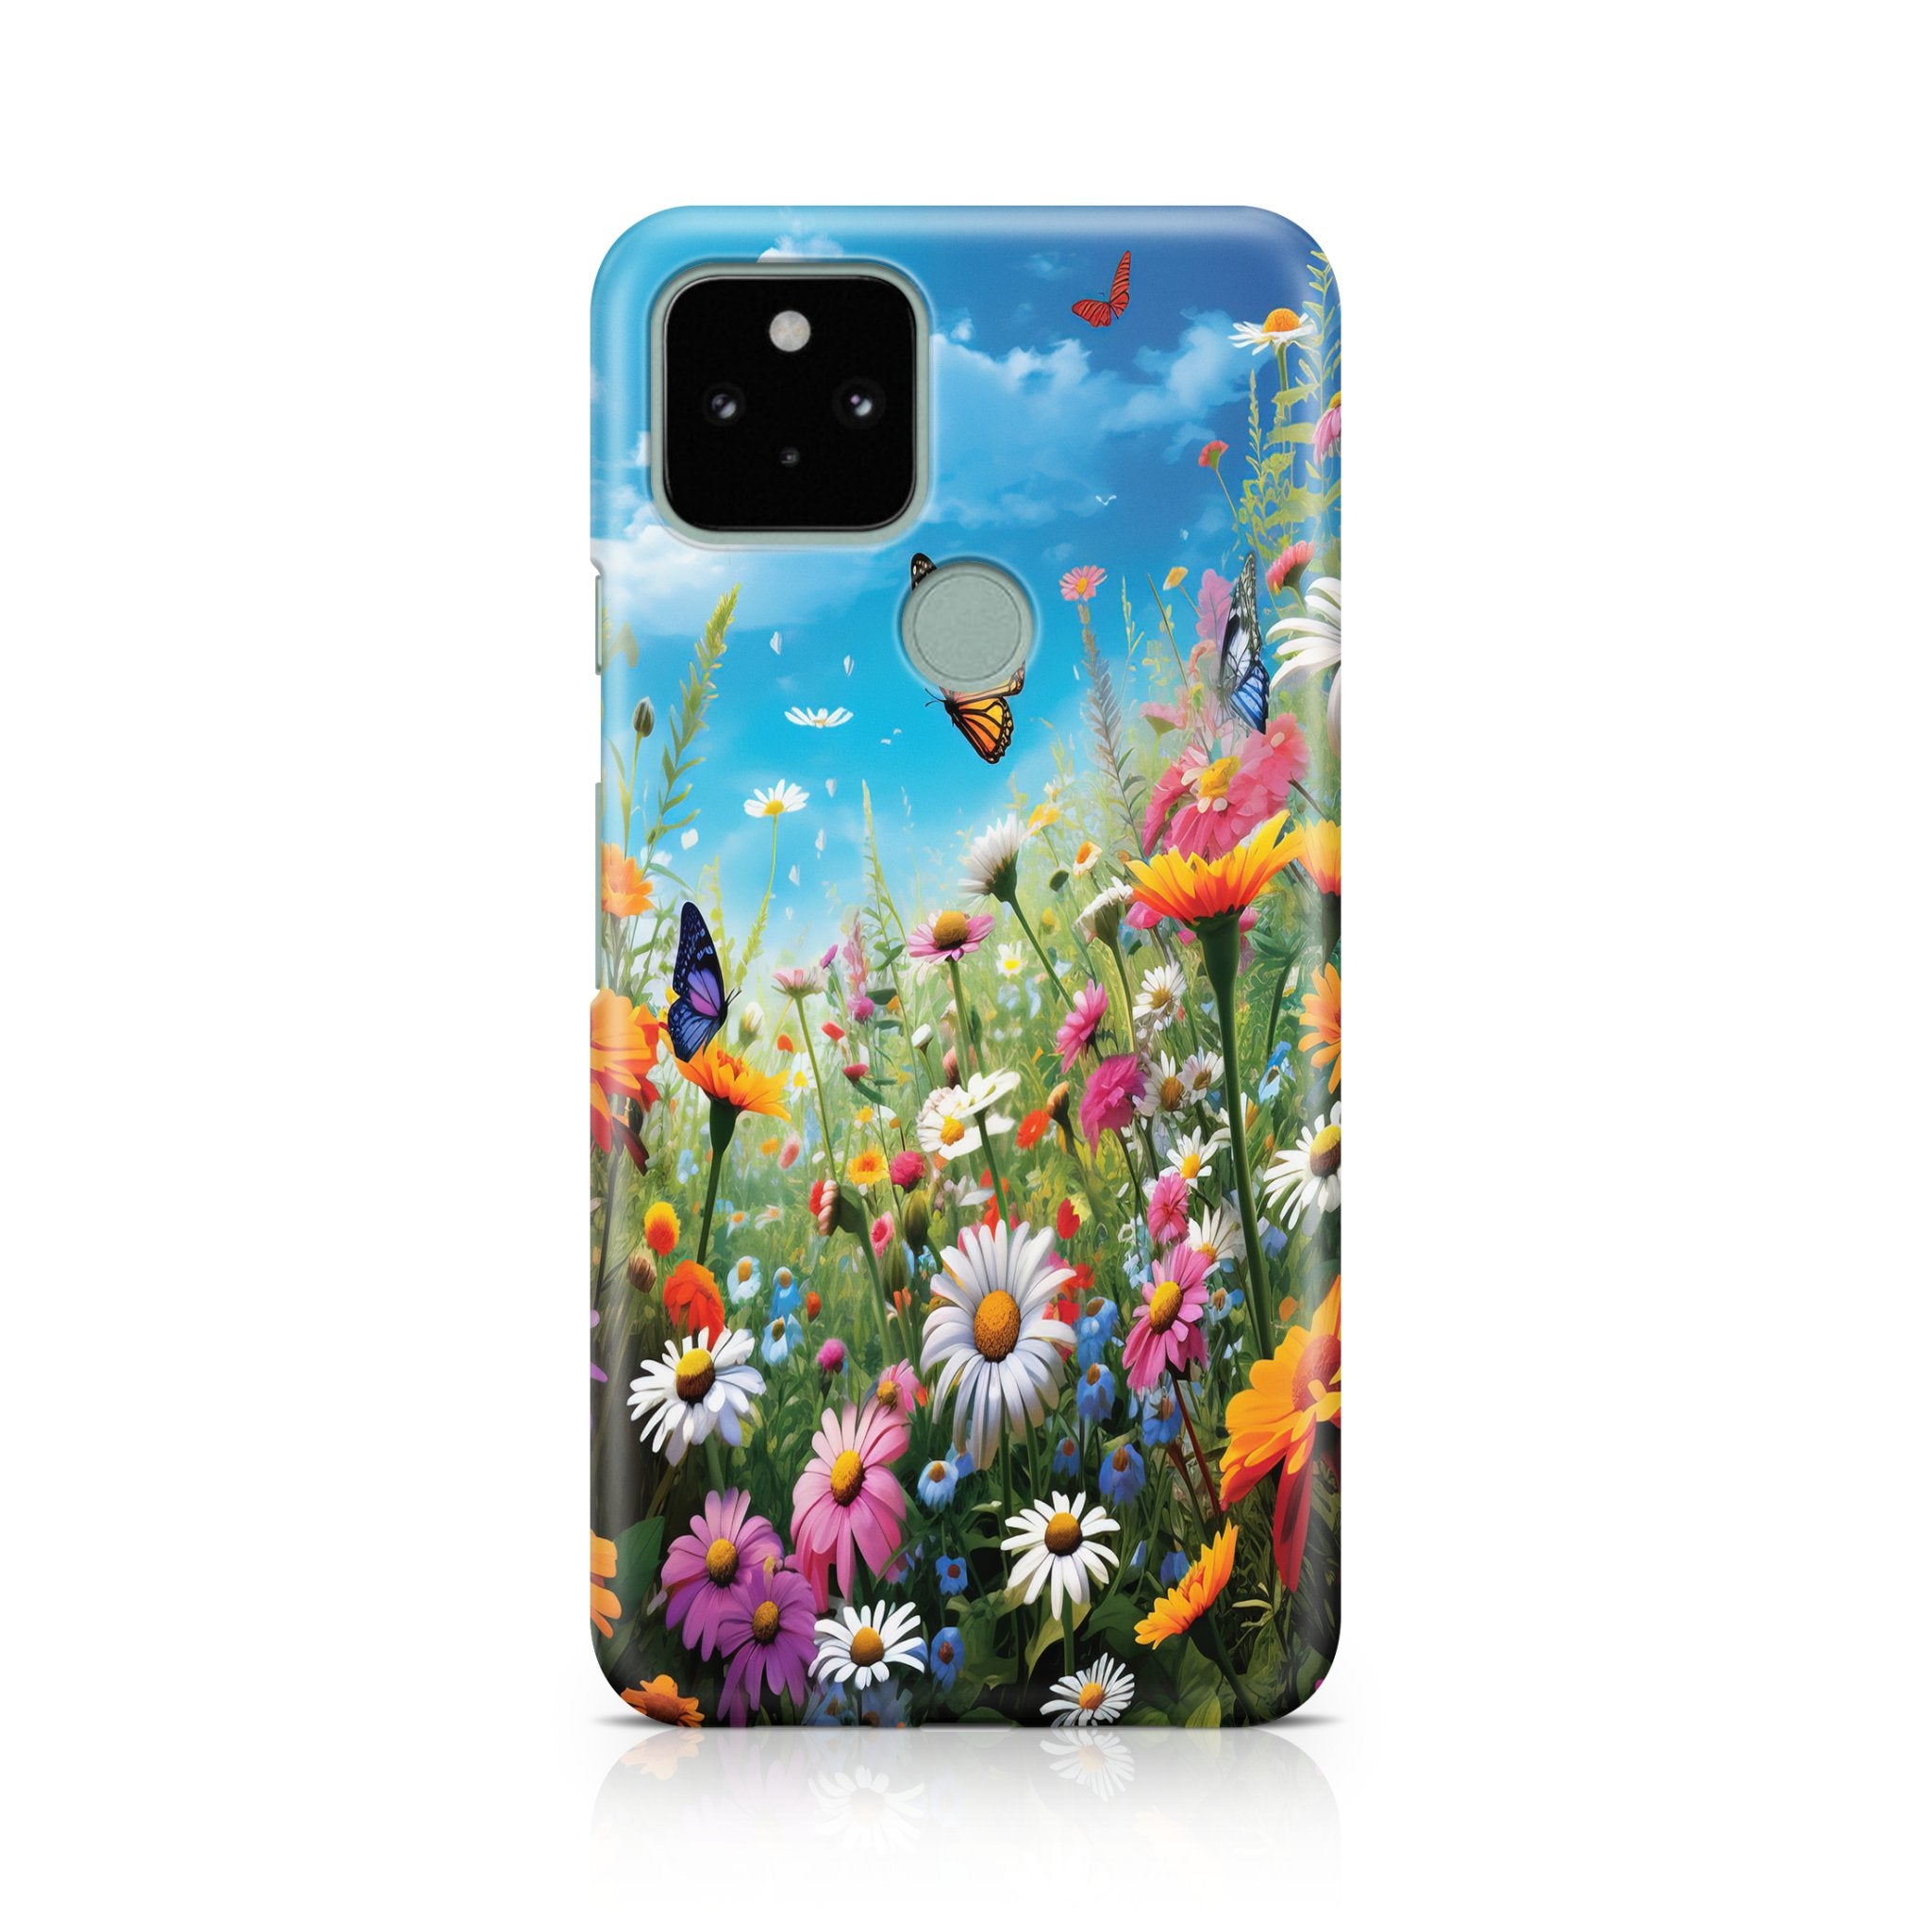 Beauty Embrace - Google phone case designs by CaseSwagger